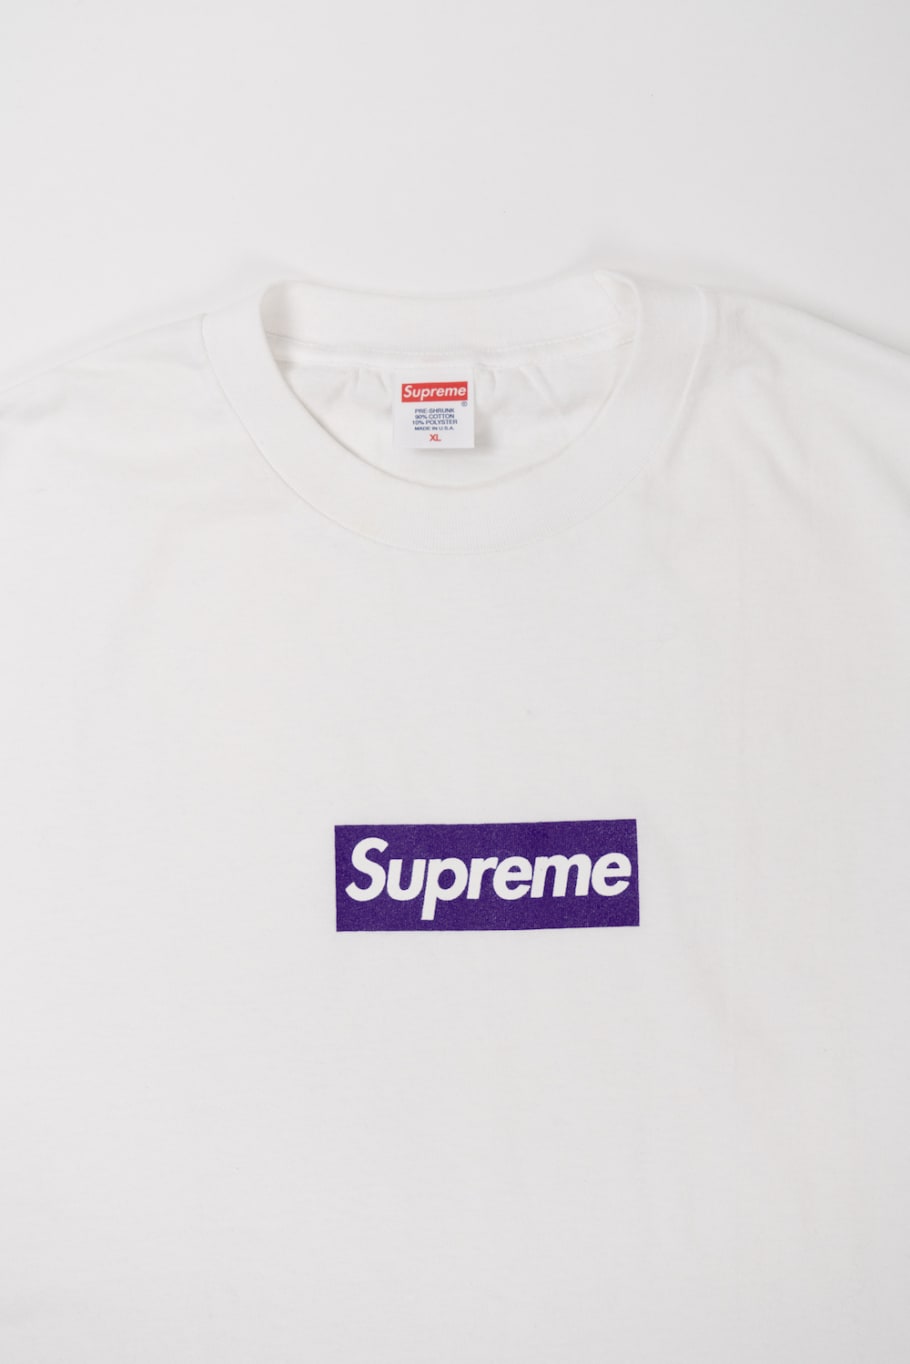 How A Supreme Collector Amassed 2m